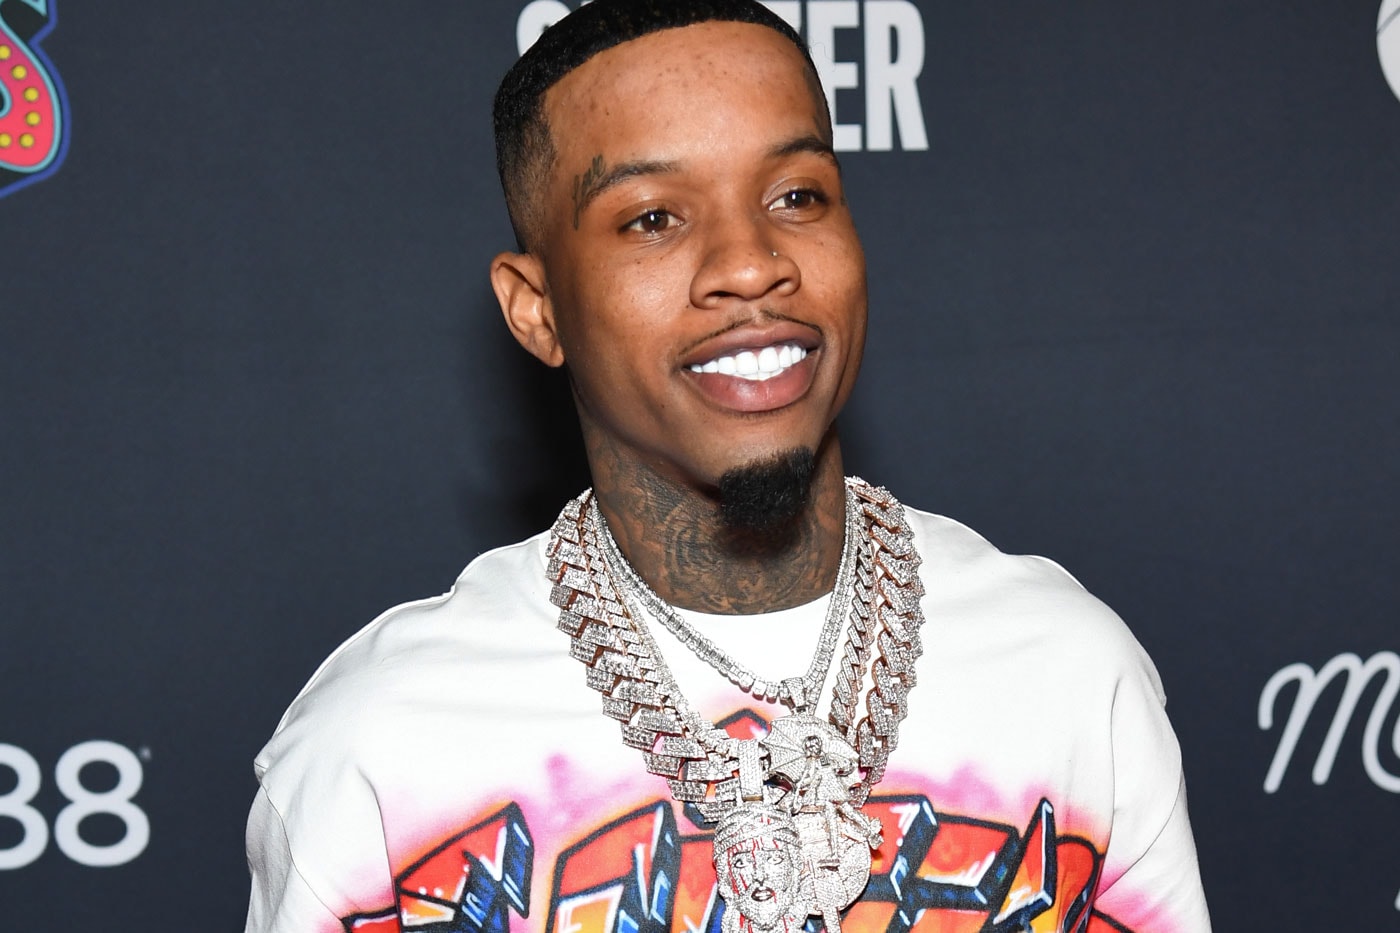 Two New Tory Lanez Projects Will Drop by Week's End